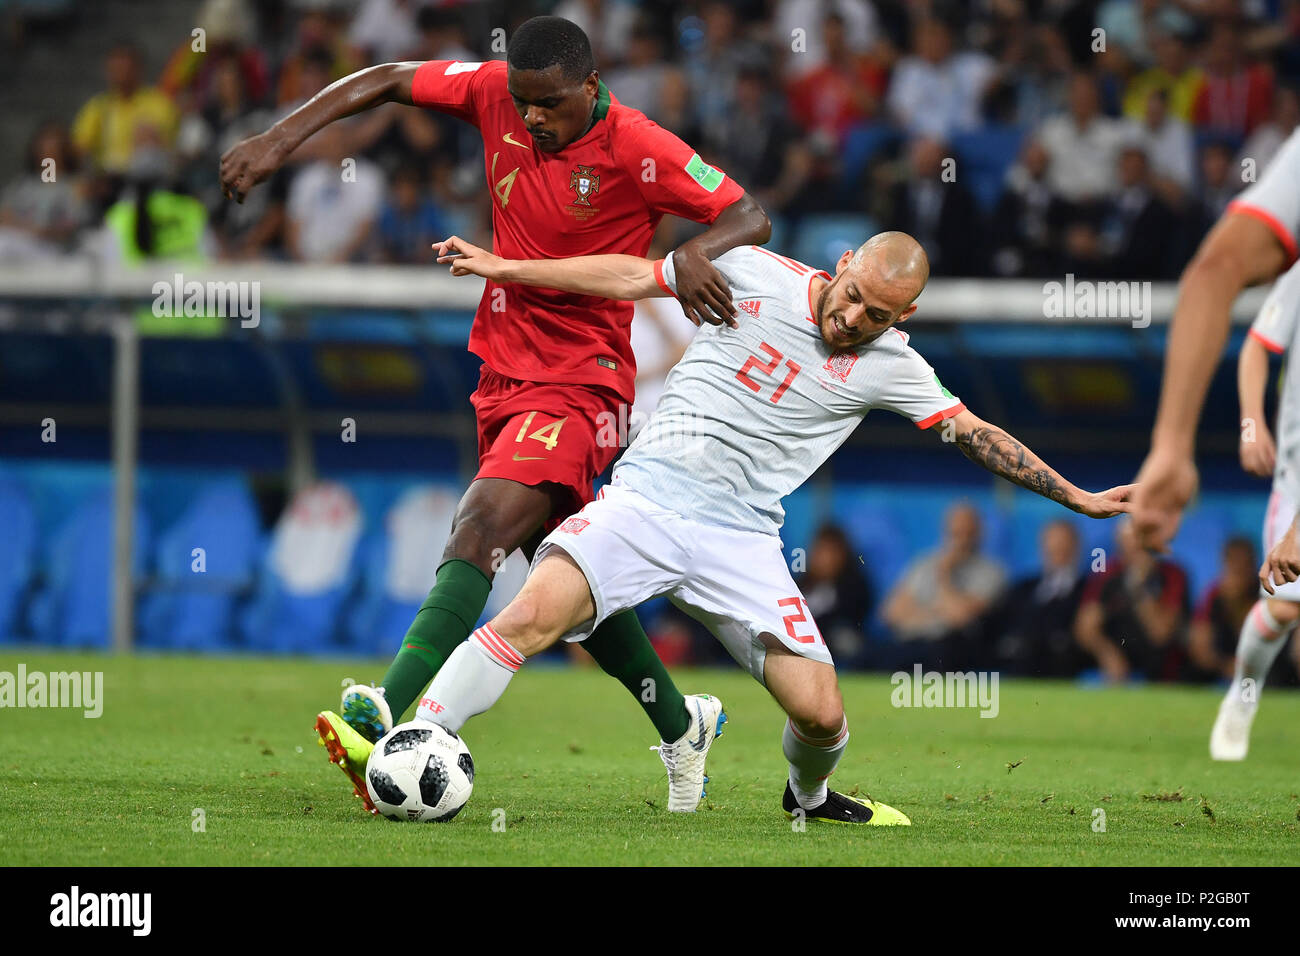 Sochi, Russland. 15th June, 2018. David SILVA (ESP, re), action, duels versus William CARVALHO (POR). Portugal (POR) - Spain (ESP) 3-3, Preliminary Round, Group B, Game 1, on 15.06.2018 in SOCHI, Fisht Olymipic Stadium. Football World Cup 2018 in Russia from 14.06. - 15.07.2018. | usage worldwide Credit: dpa/Alamy Live News Stock Photo